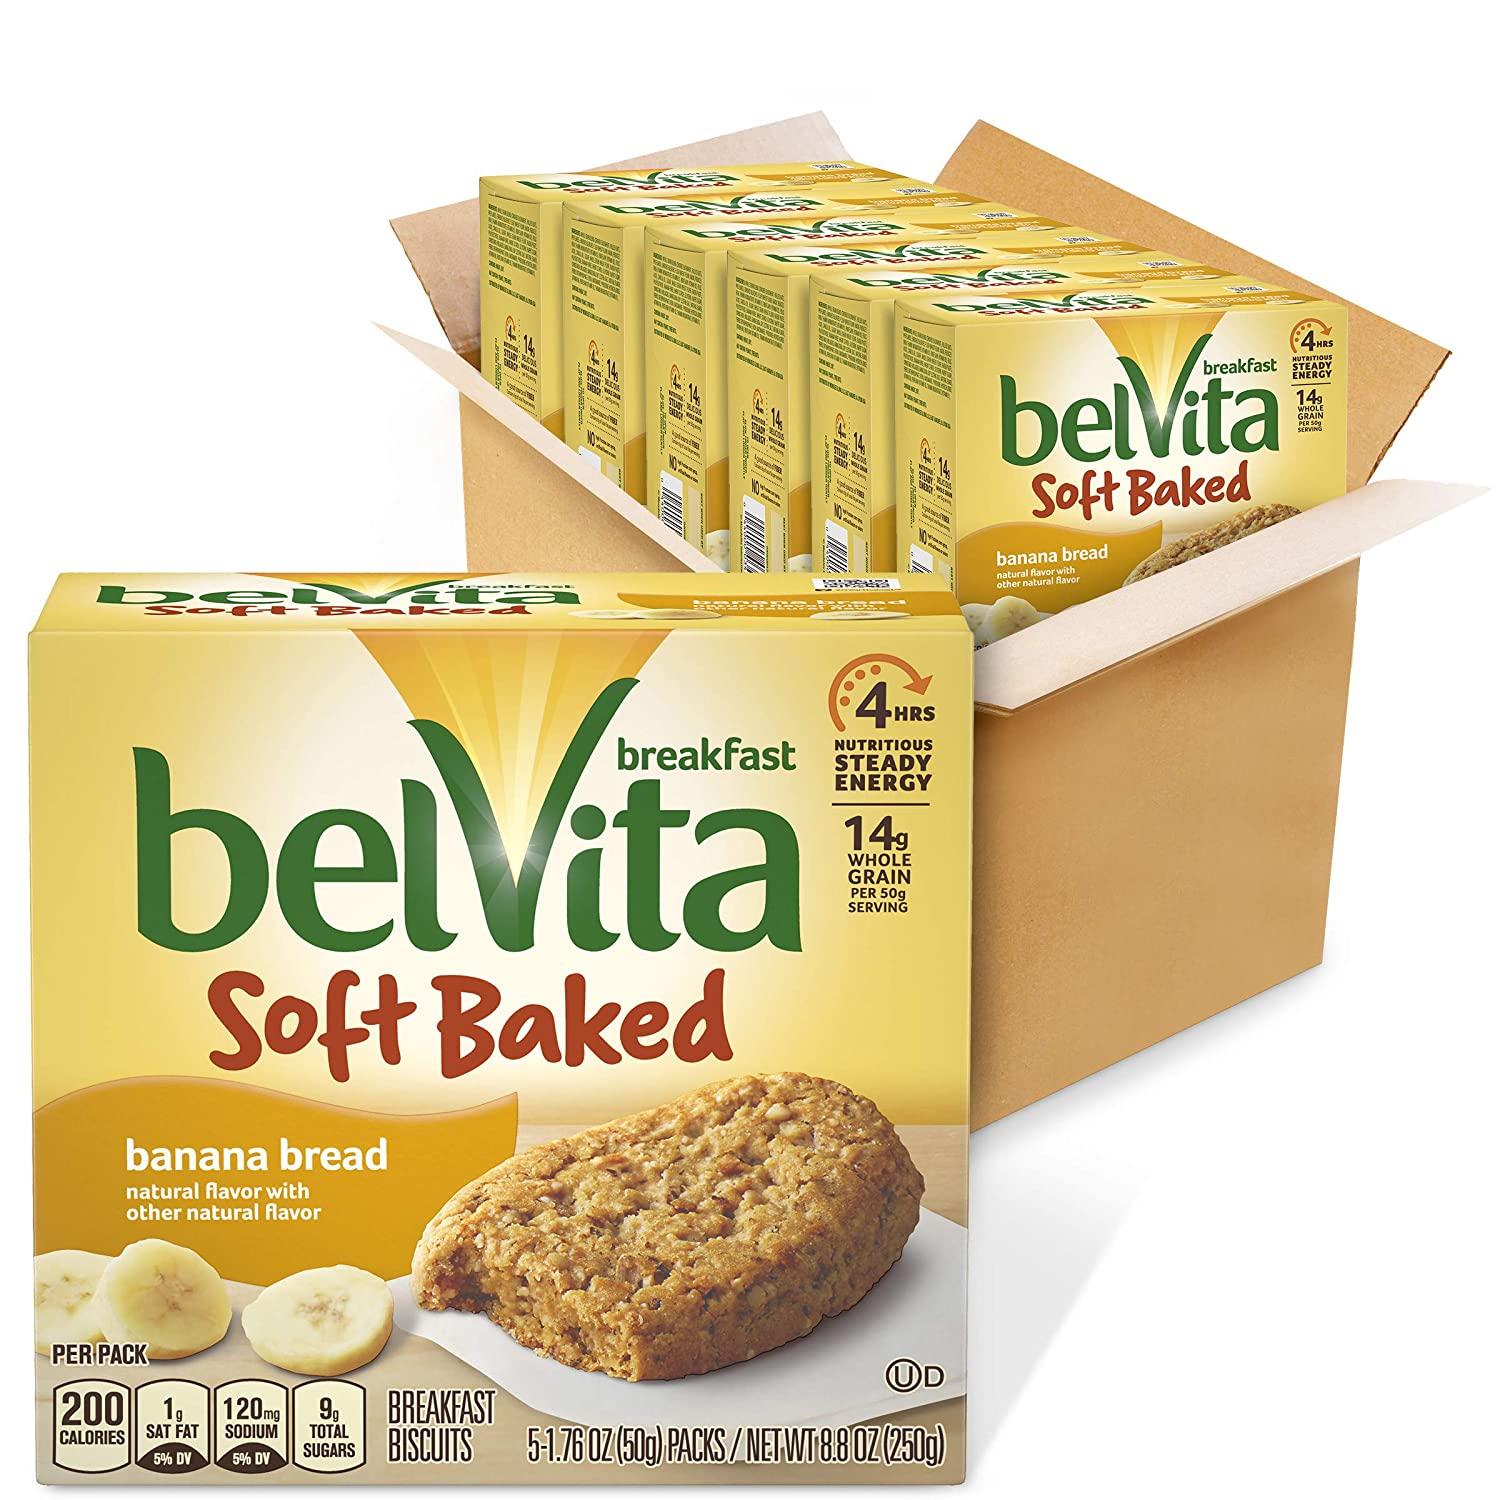 30 belVita Soft Baked Breakfast Biscuits for $9.99 Shipped